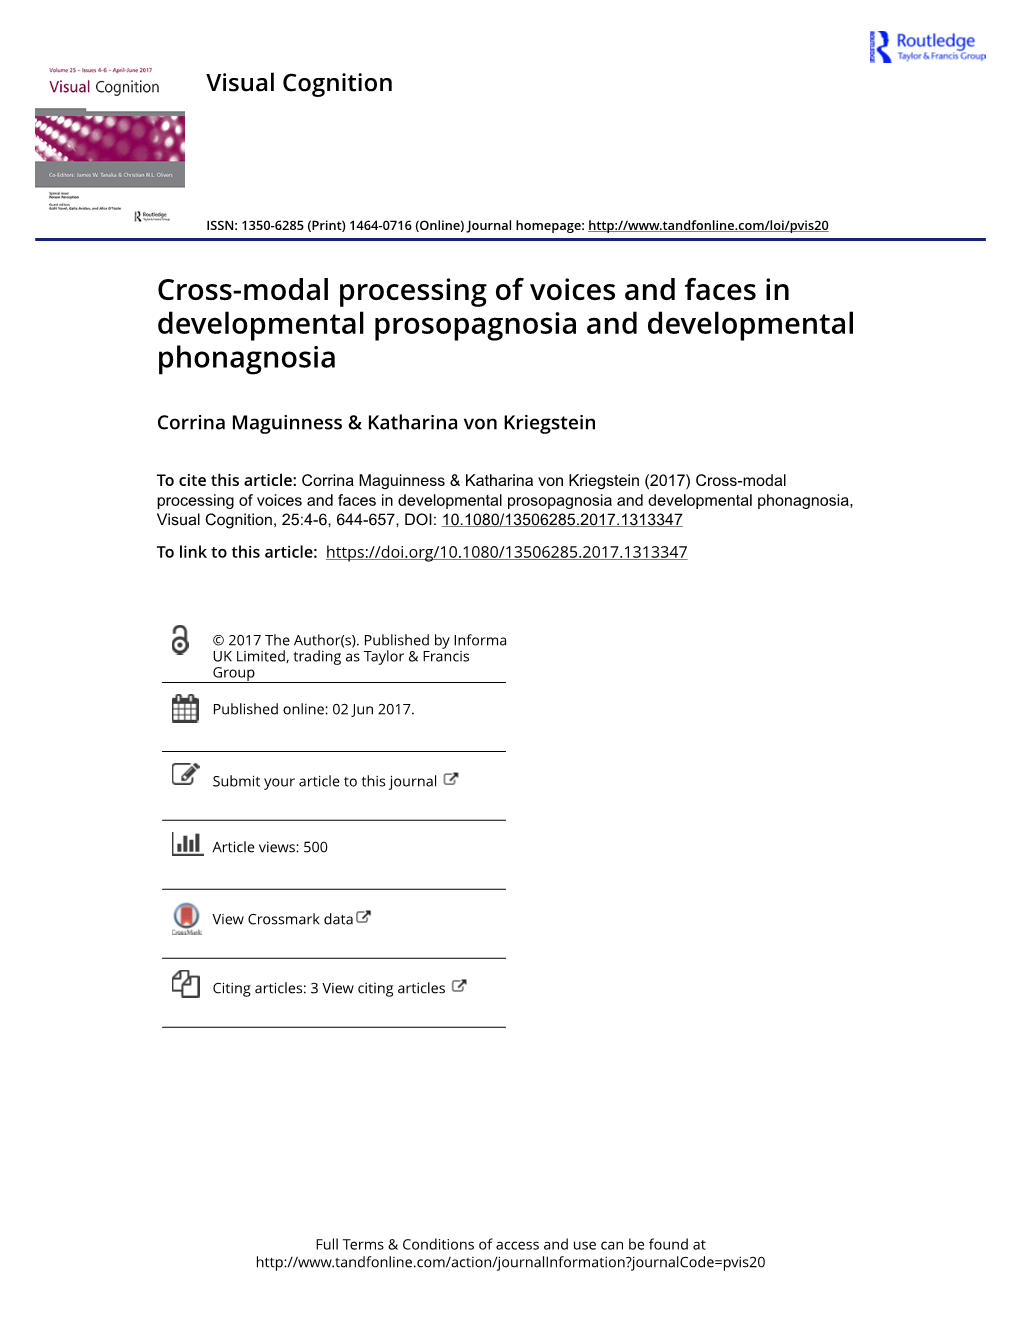 Cross-Modal Processing of Voices and Faces in Developmental Prosopagnosia and Developmental Phonagnosia